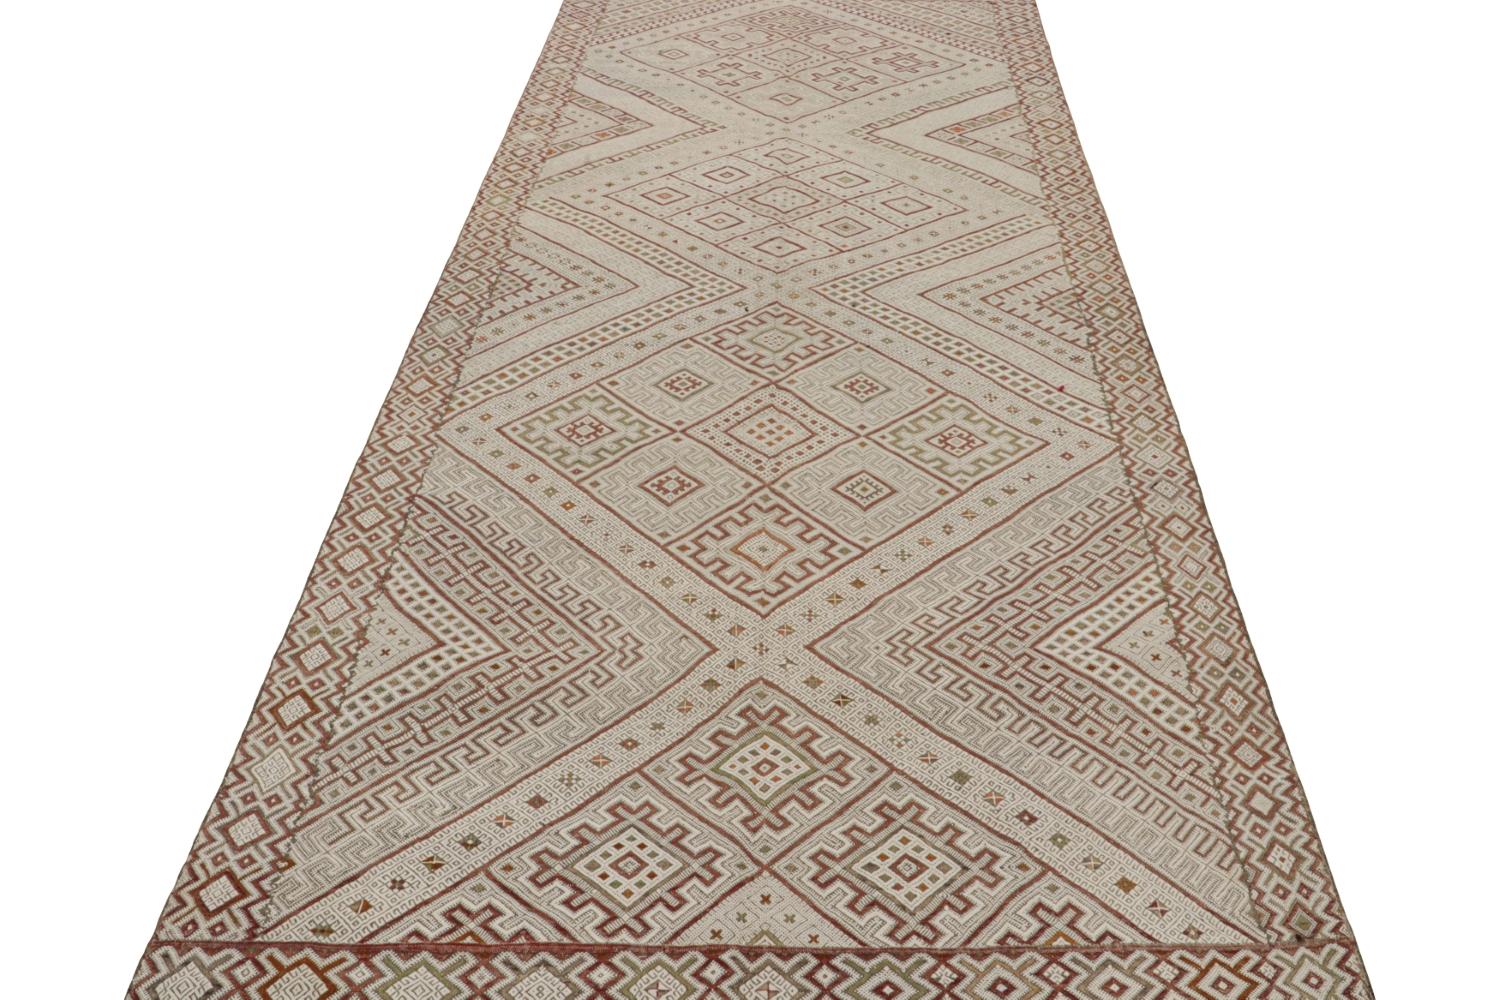 Hand-Woven Beige Vintage Zayane Moroccan Kilim Rug with Geometric Pattern, from Rug & Kilim For Sale